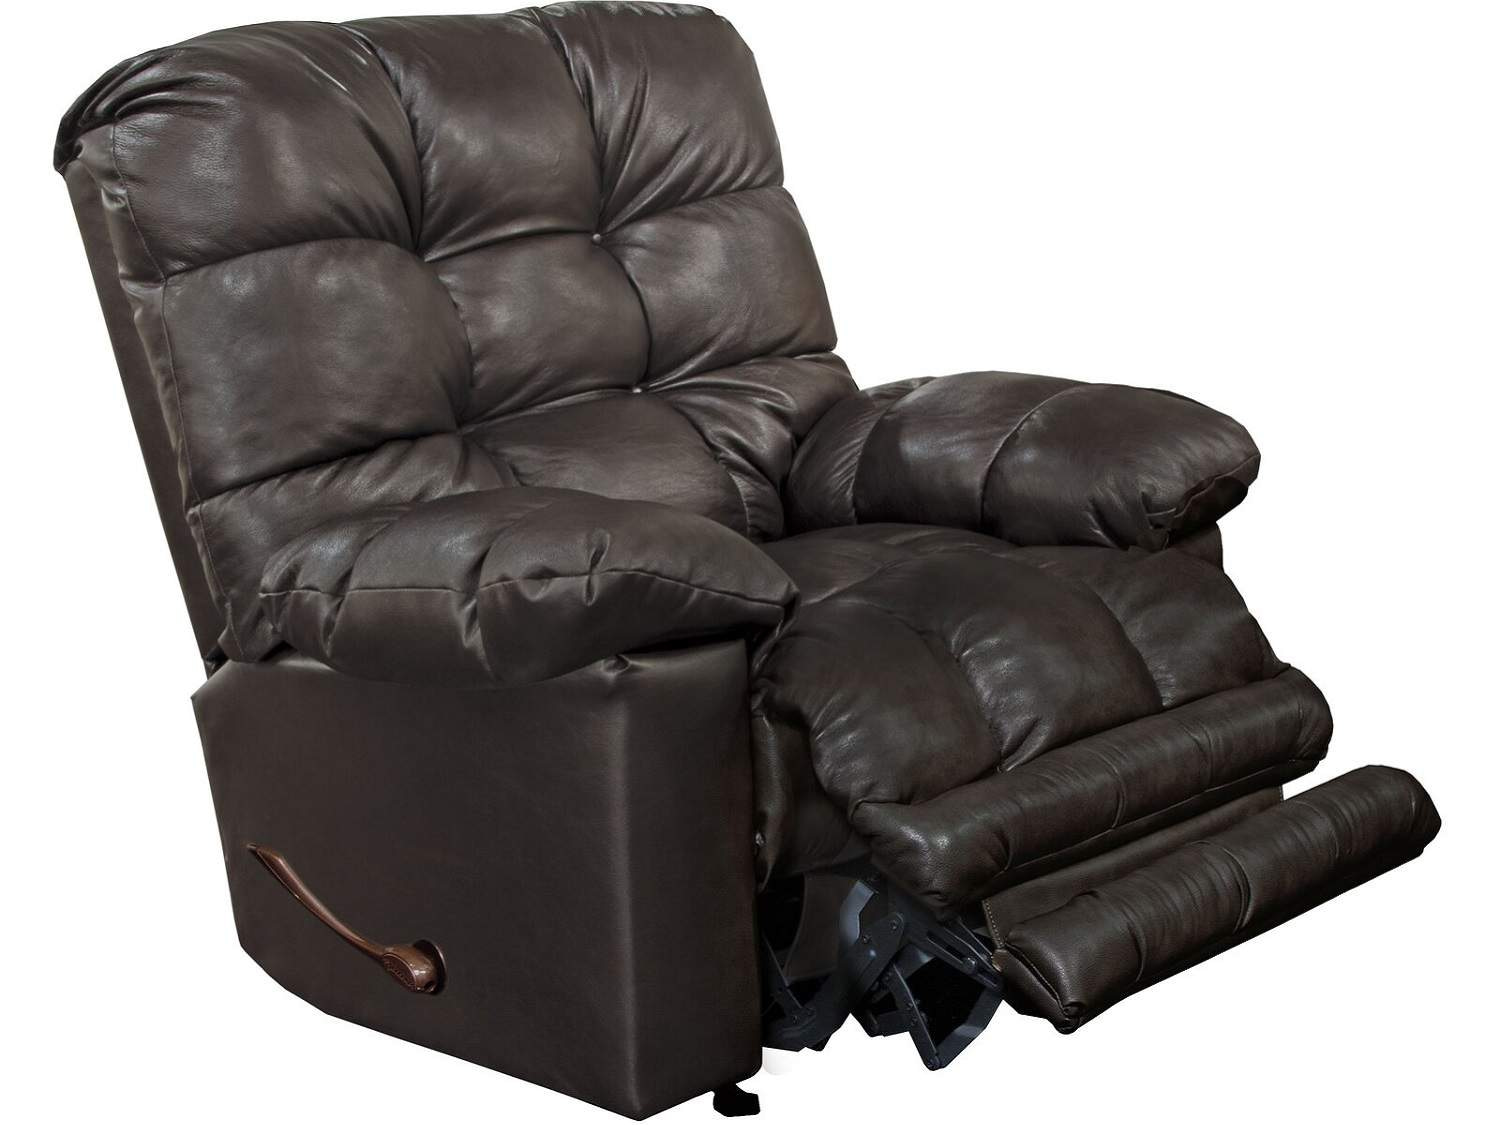 DELTA Leather Recliner Chair - Open